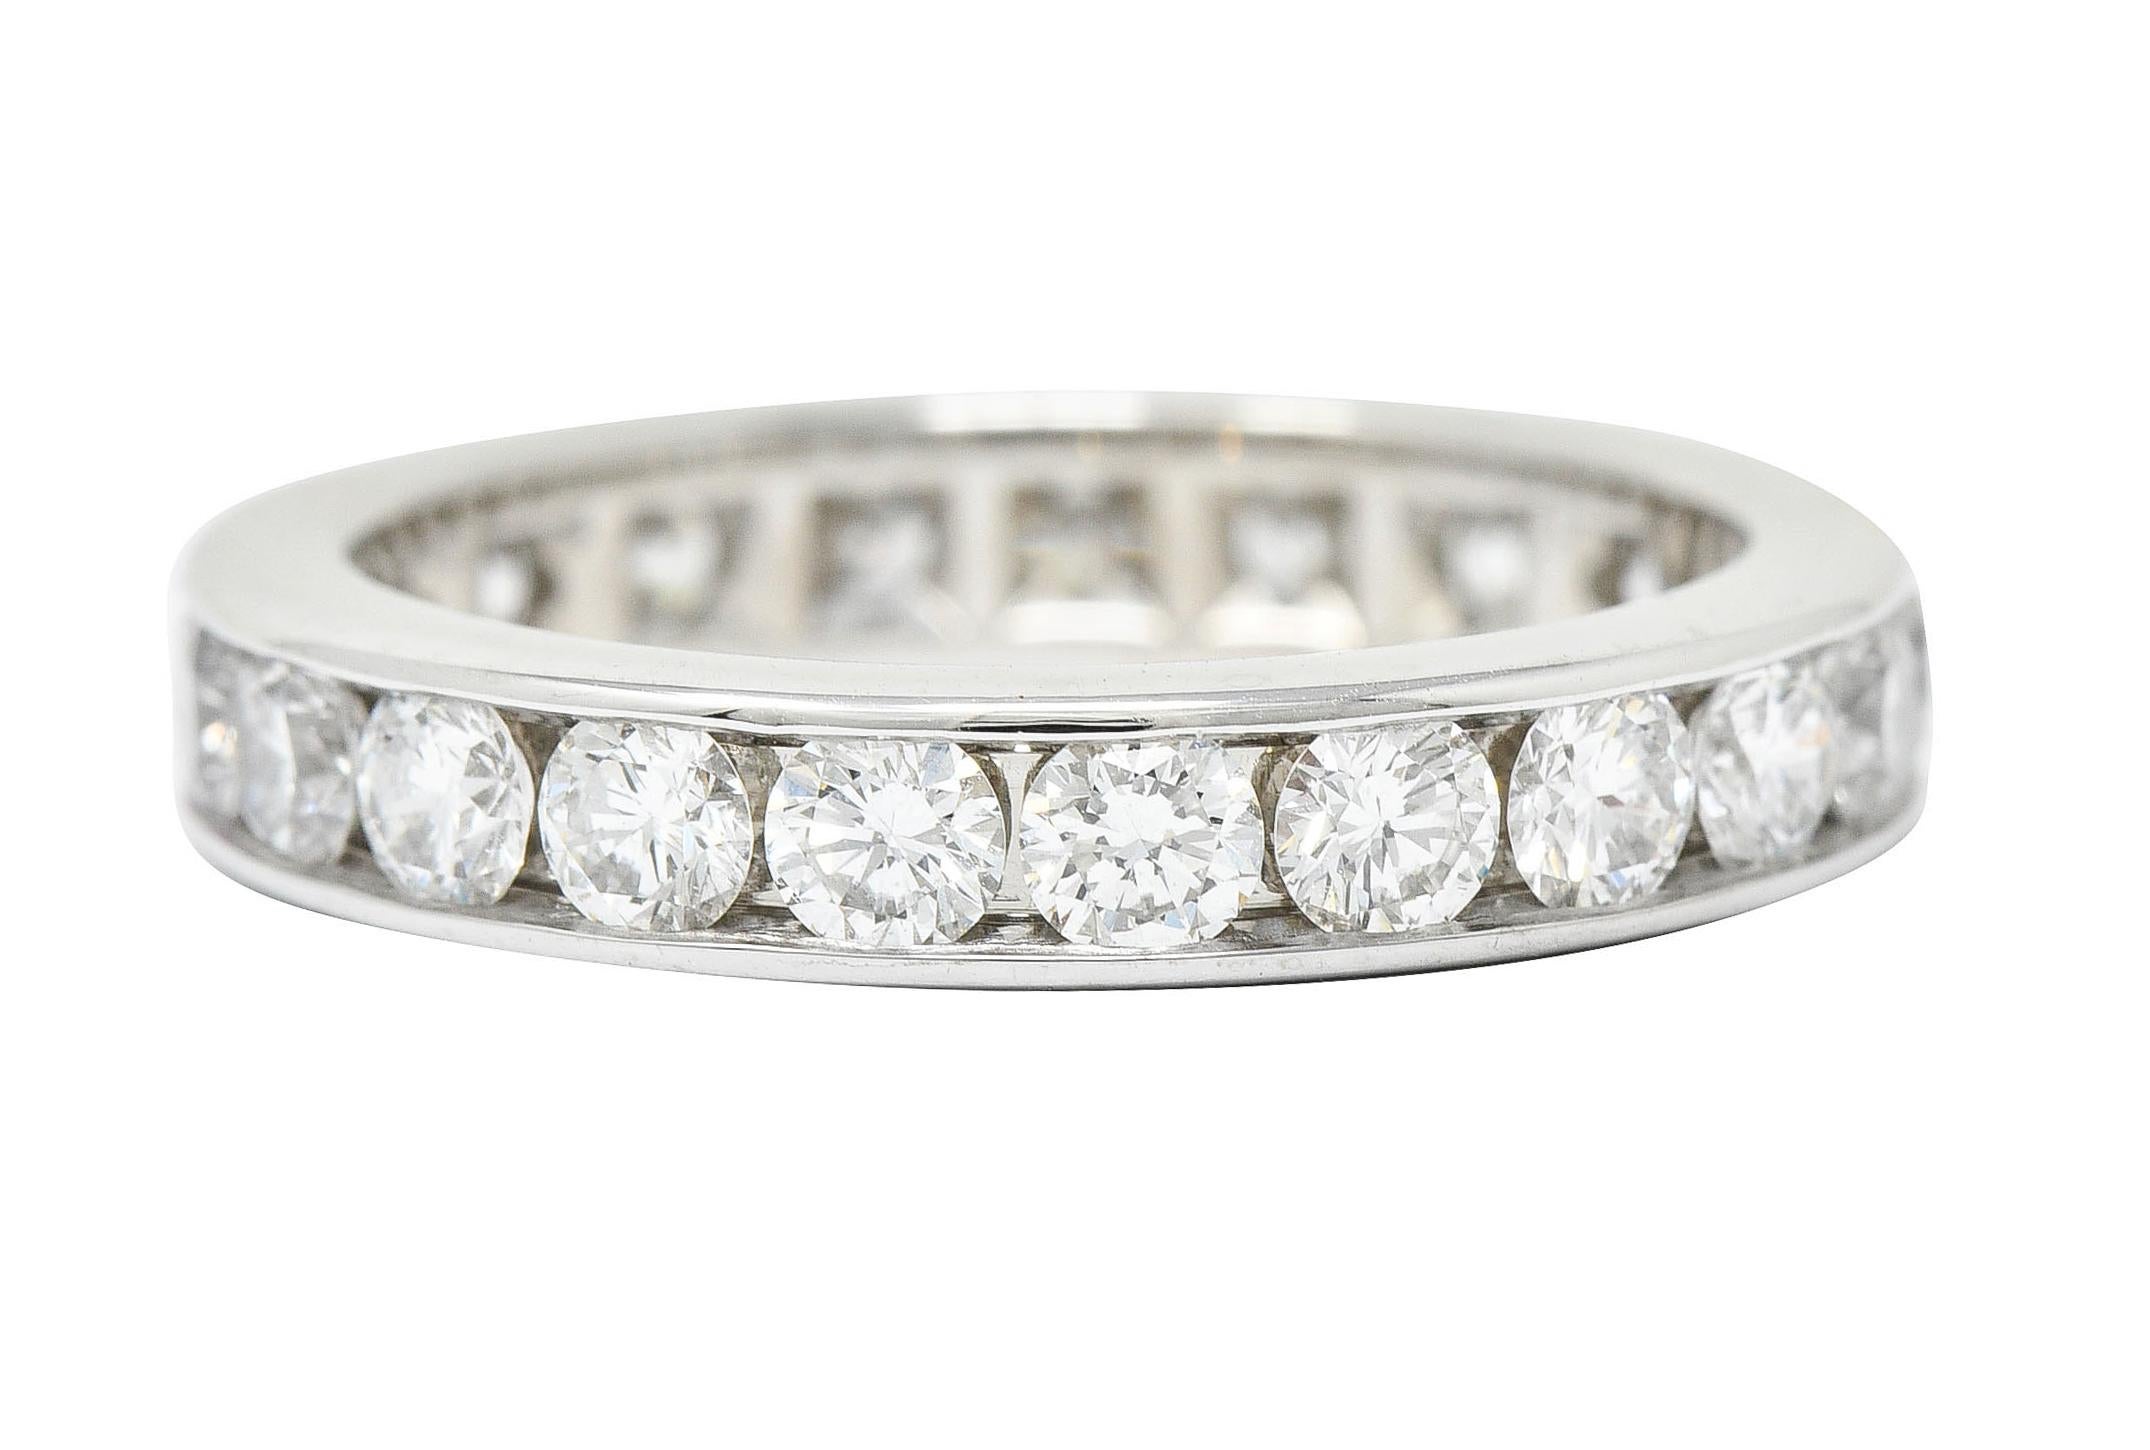 Eternity band ring is channel set fully around by round brilliant cut diamonds

Weighing in total approximately 2.10 carats with F/G color and VS clarity

Stamped PT950 for platinum

Fully signed Tiffany & Co.

Circa: 2000s

Ring Size: 7 & not